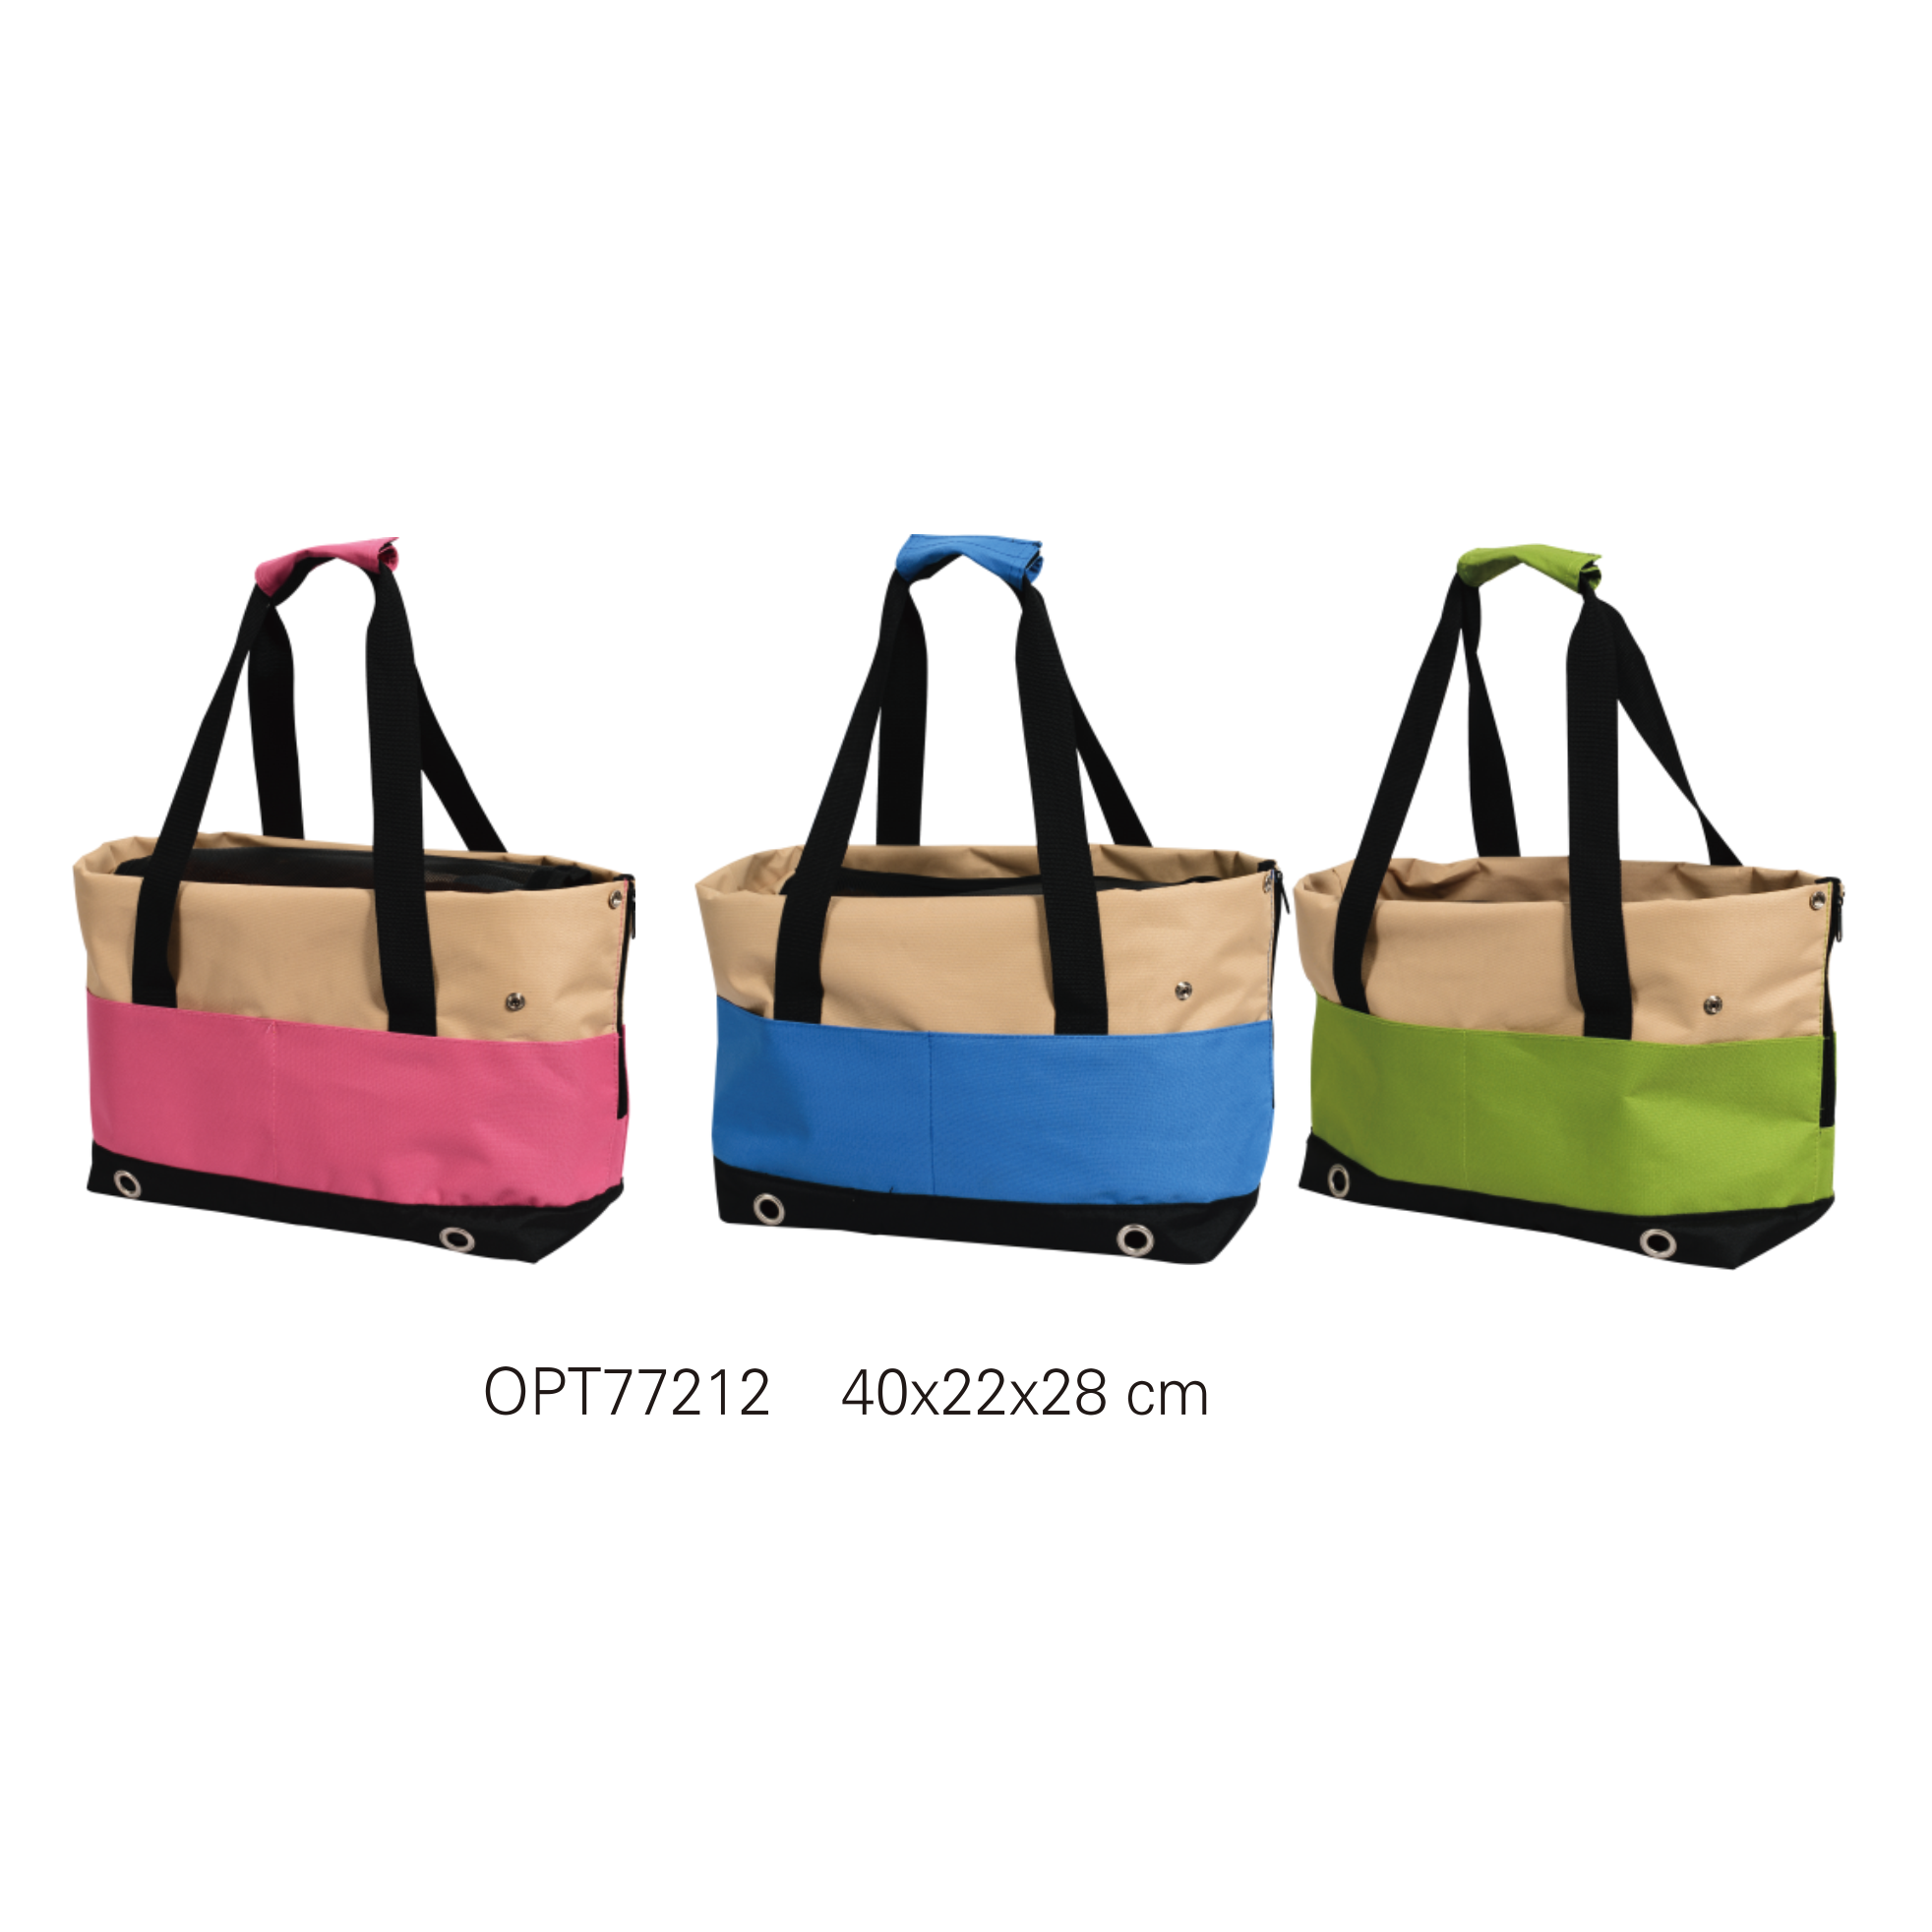 OPT77212 Pet bags & carriers